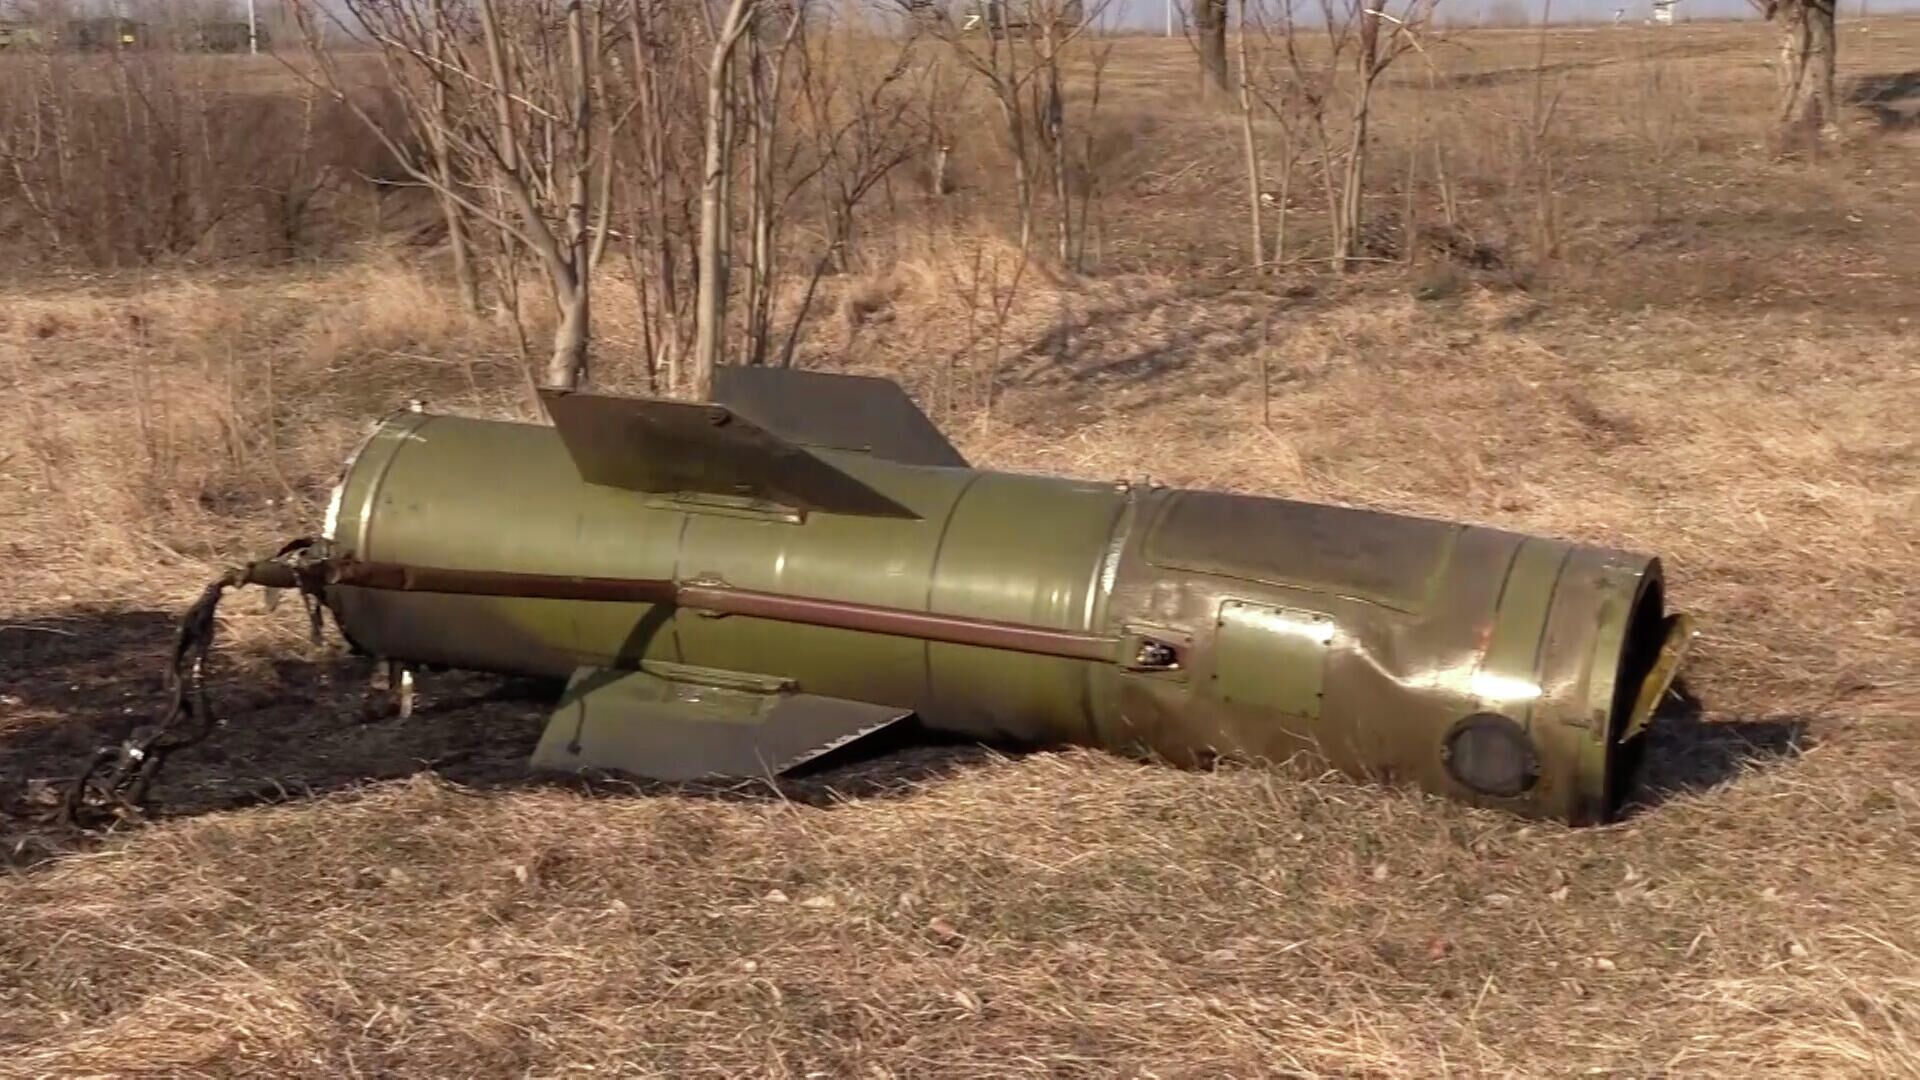 British Intelligence: Russia's munition accidents linked to inadequate training and crew fatigue